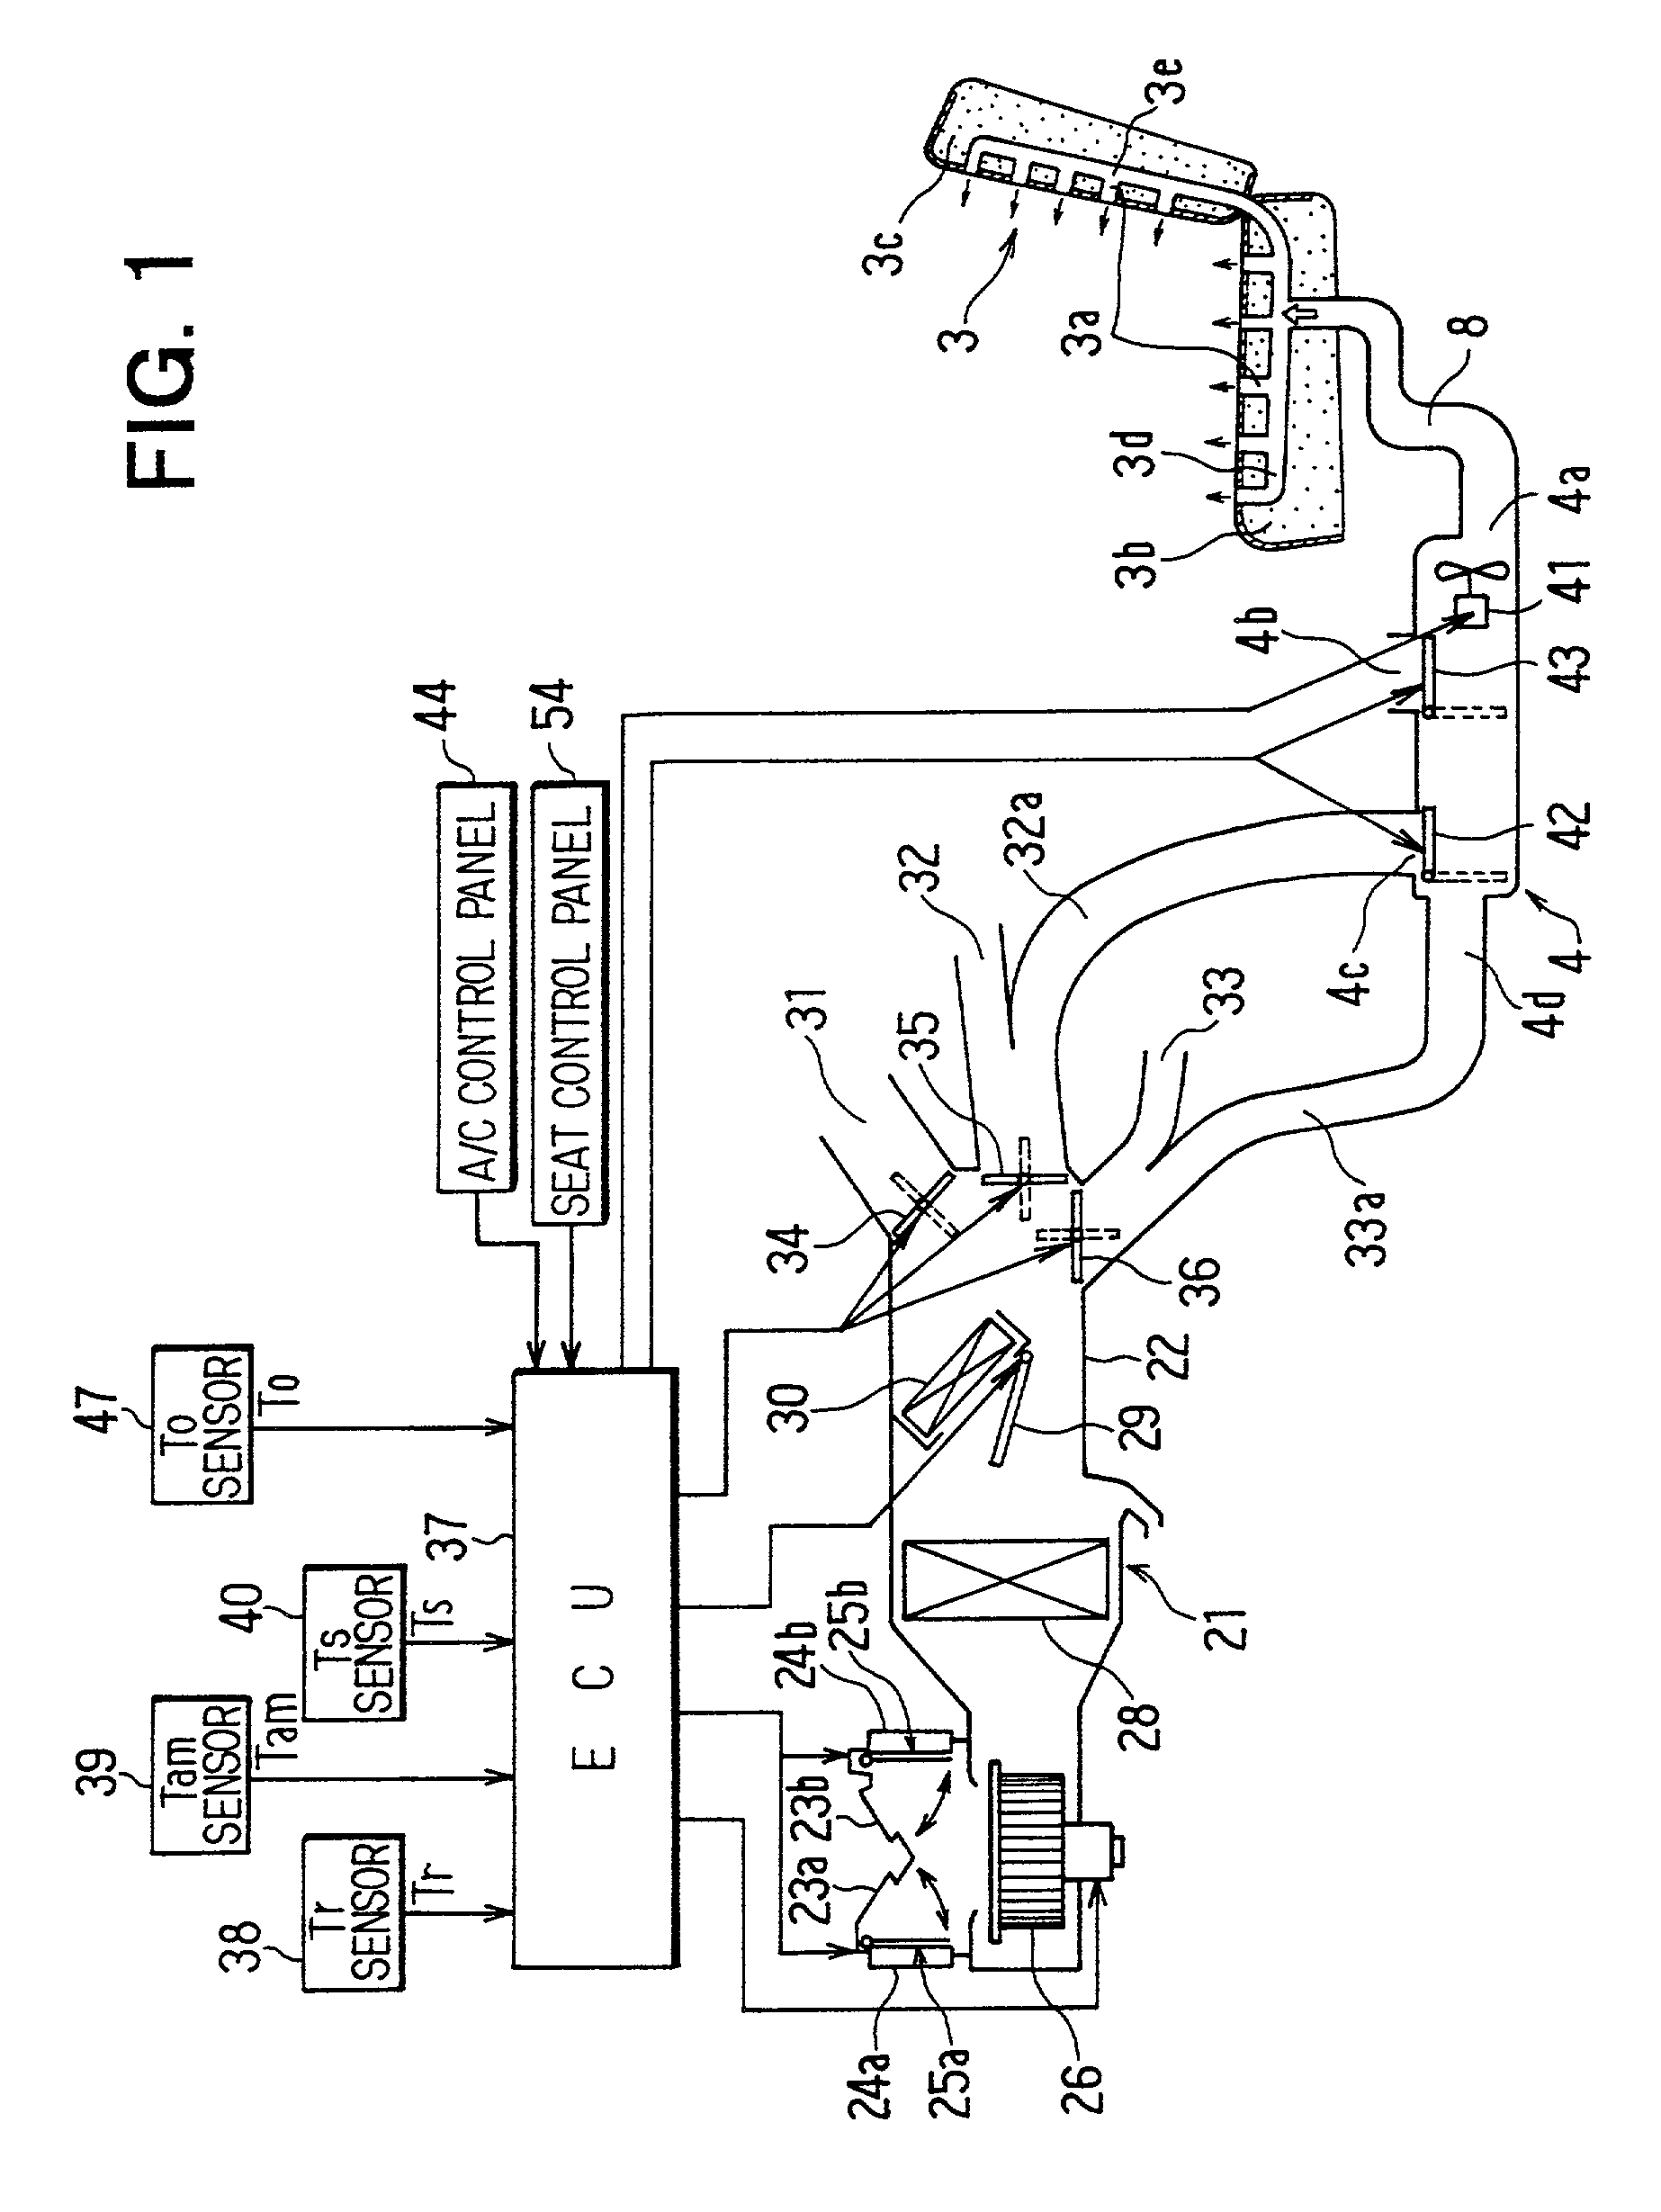 Vehicle air conditioning system with seat air conditioning unit